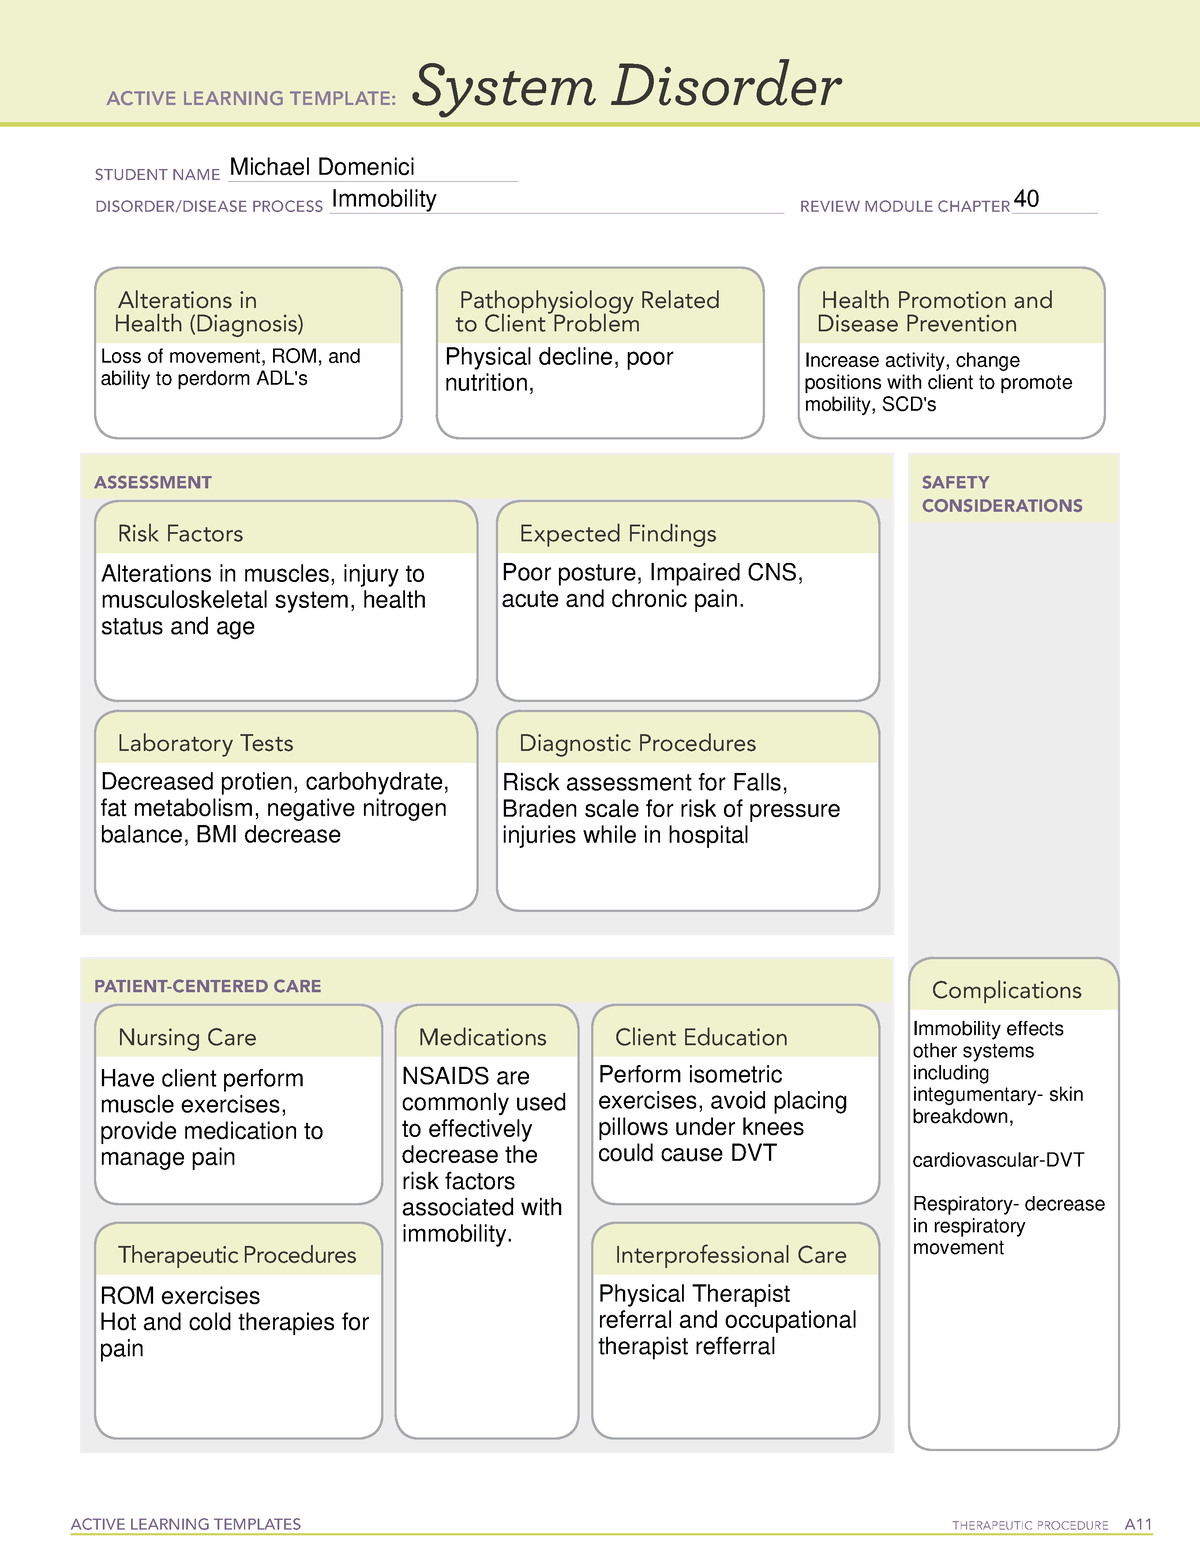 active-learning-template-system-disorder-3-active-learning-templates-therapeutic-procedure-a